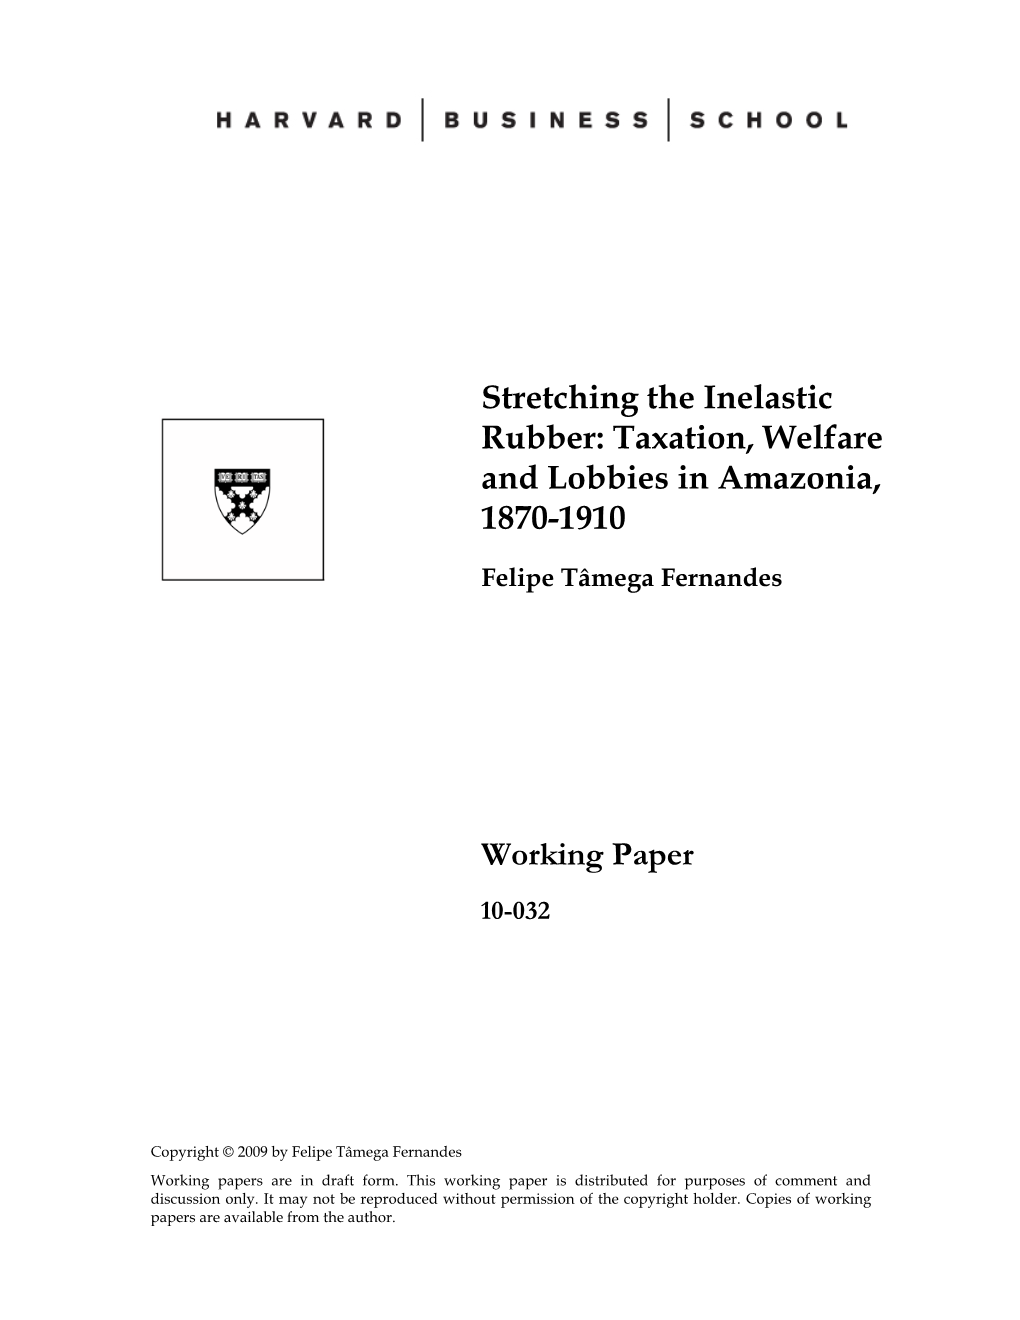 Stretching the Inelastic Rubber: Taxation, Welfare and Lobbies in Amazonia, 1870-1910 Working Paper